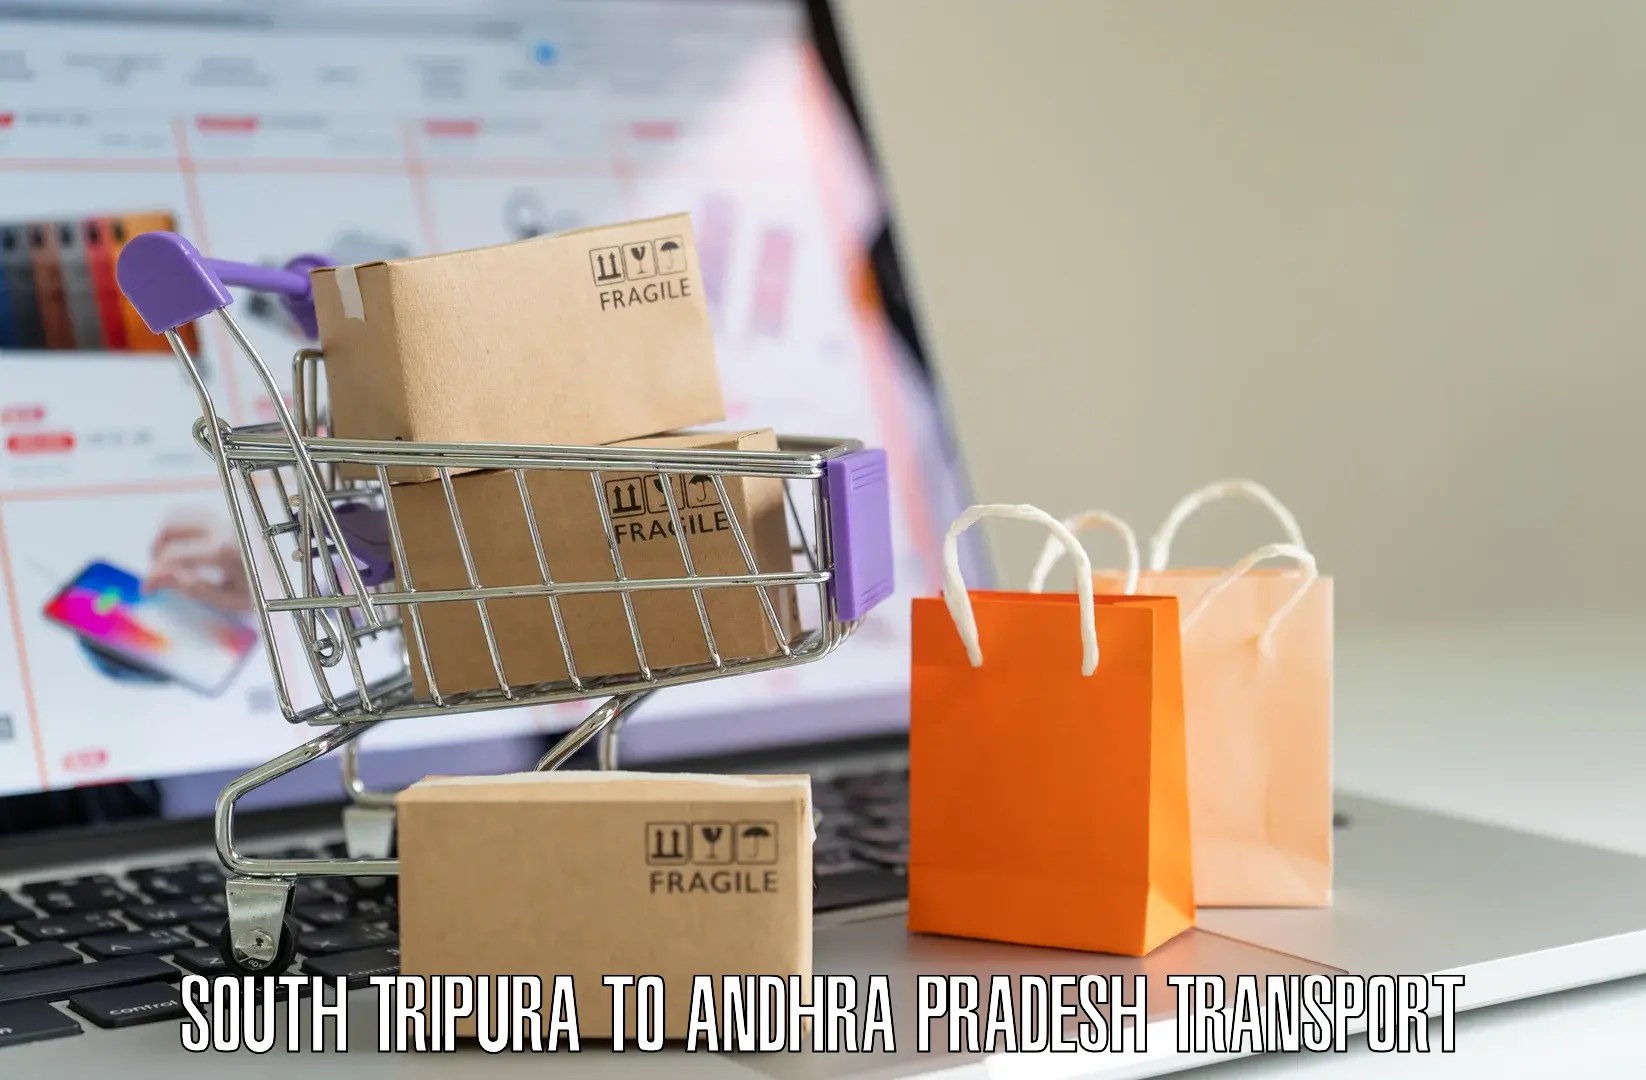 Air freight transport services South Tripura to Pathapatnam